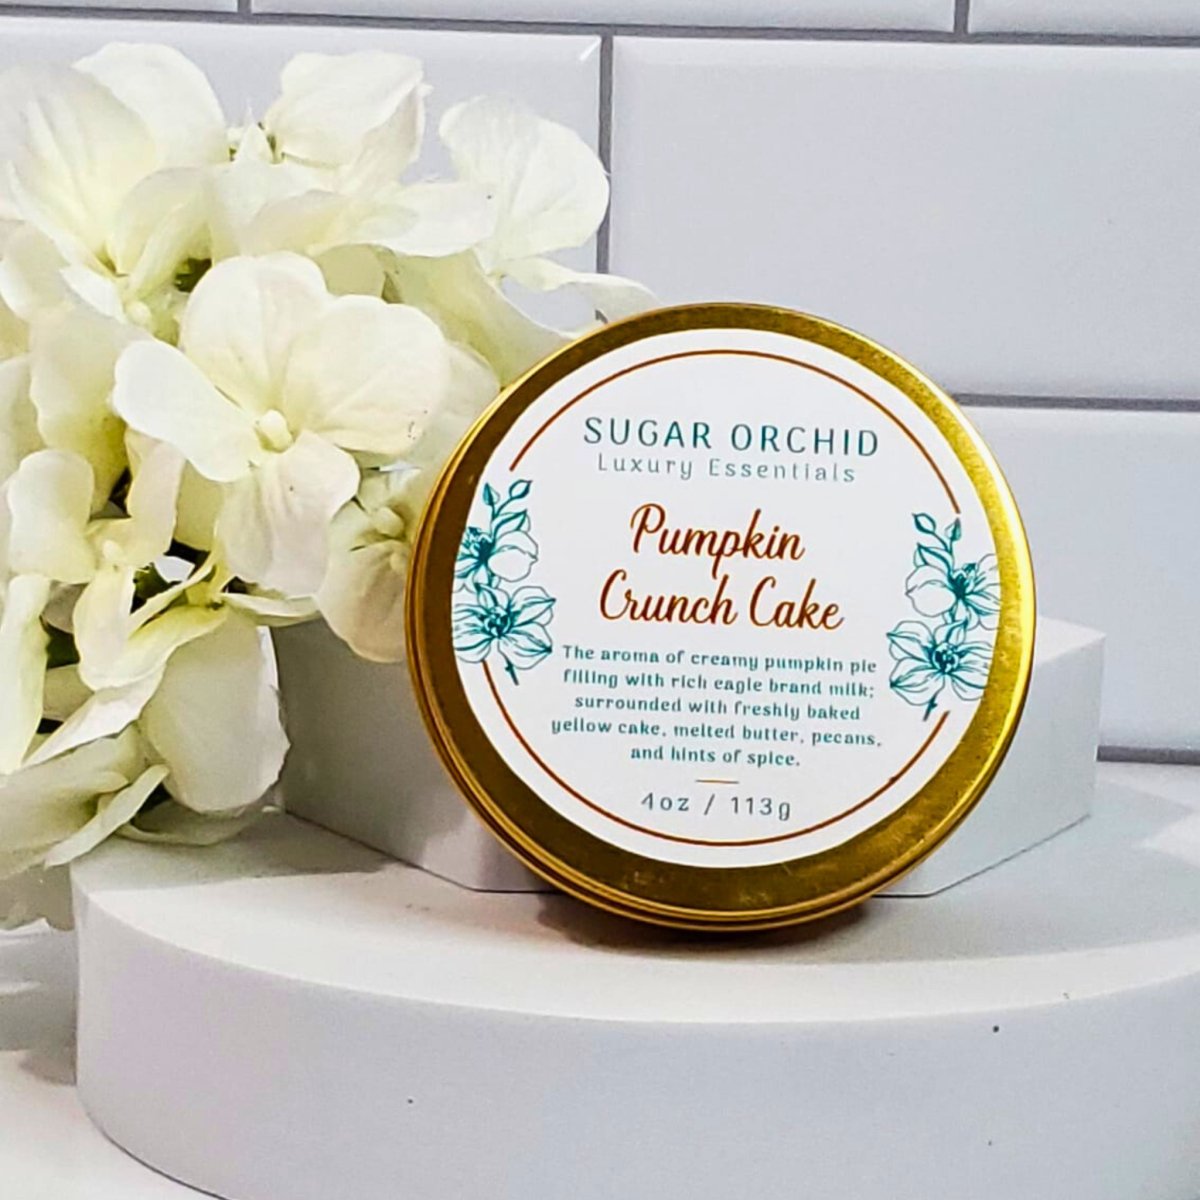 Compact Candle - Sugar Orchid Luxury Essentials